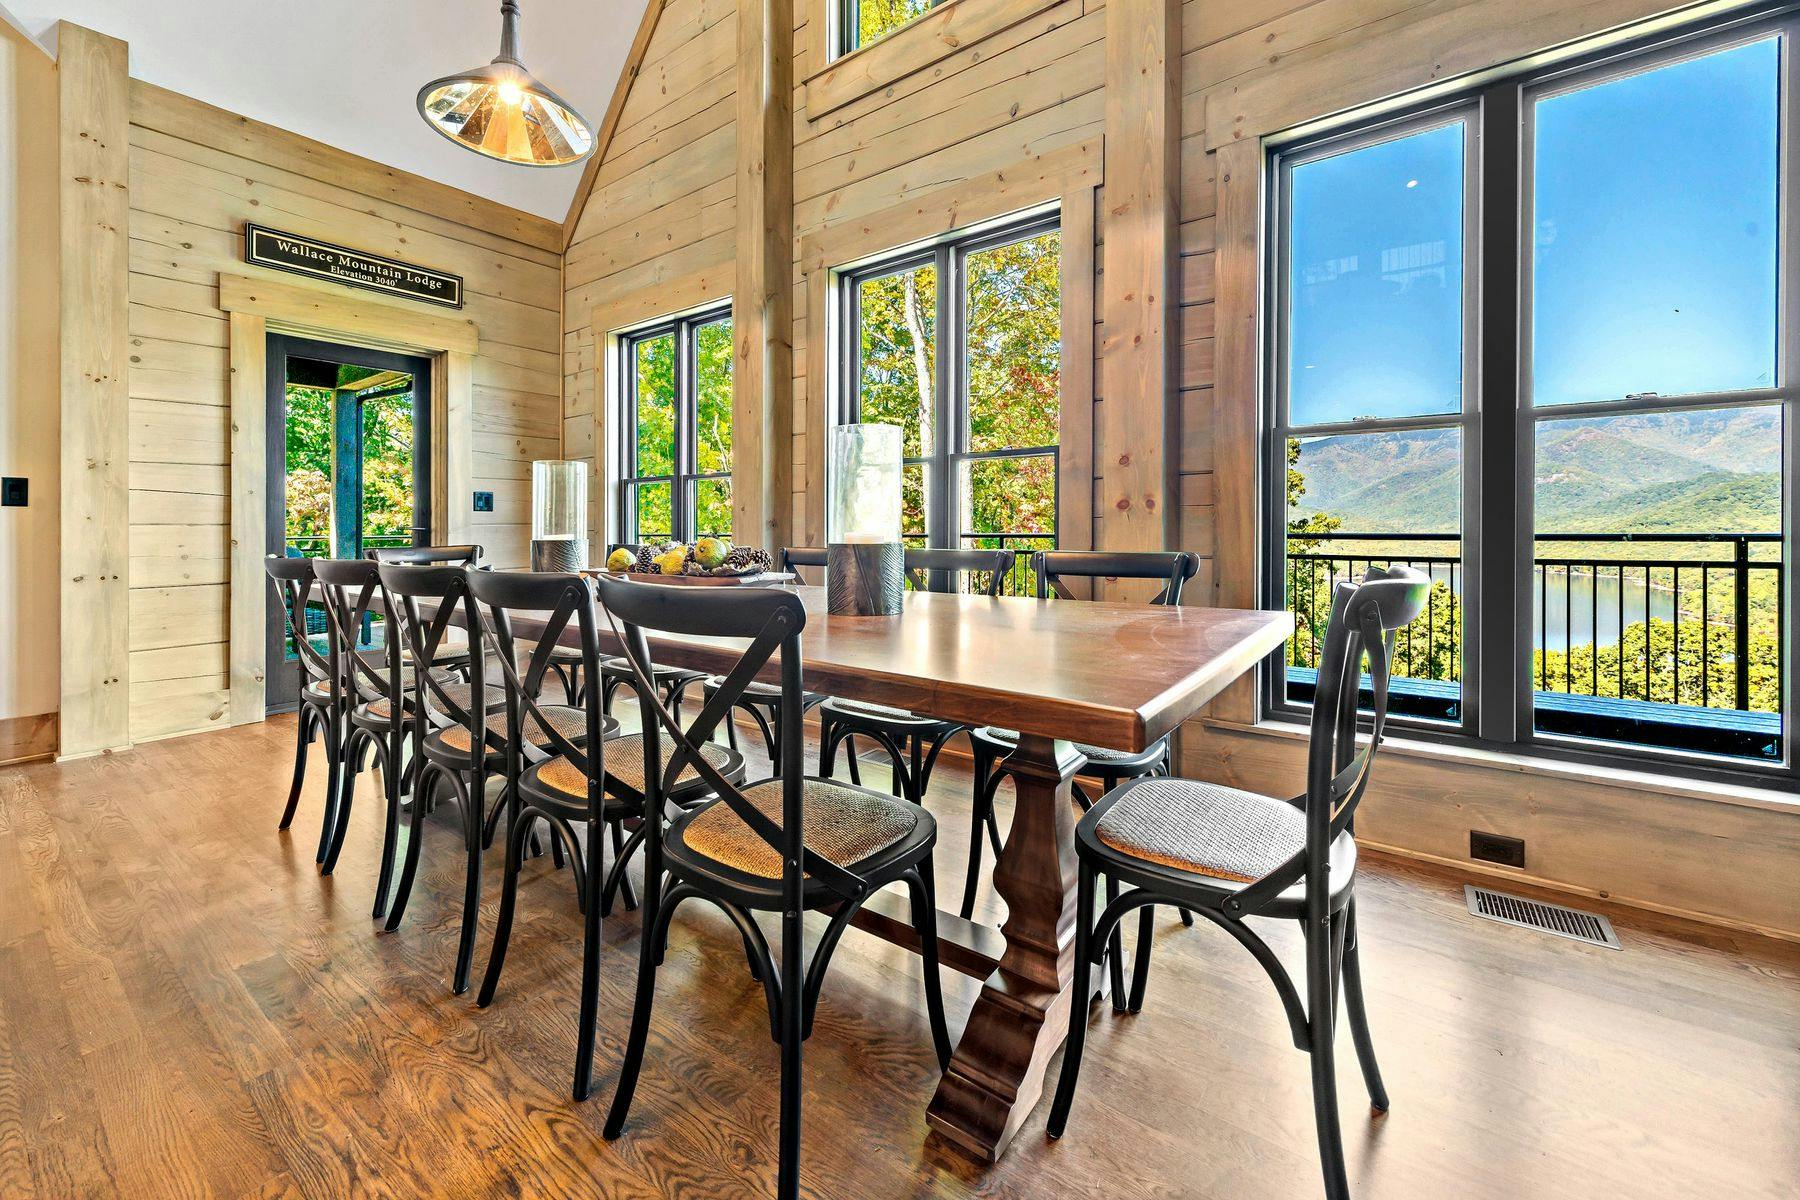 Dining room with views in a North Carolina vacation rental